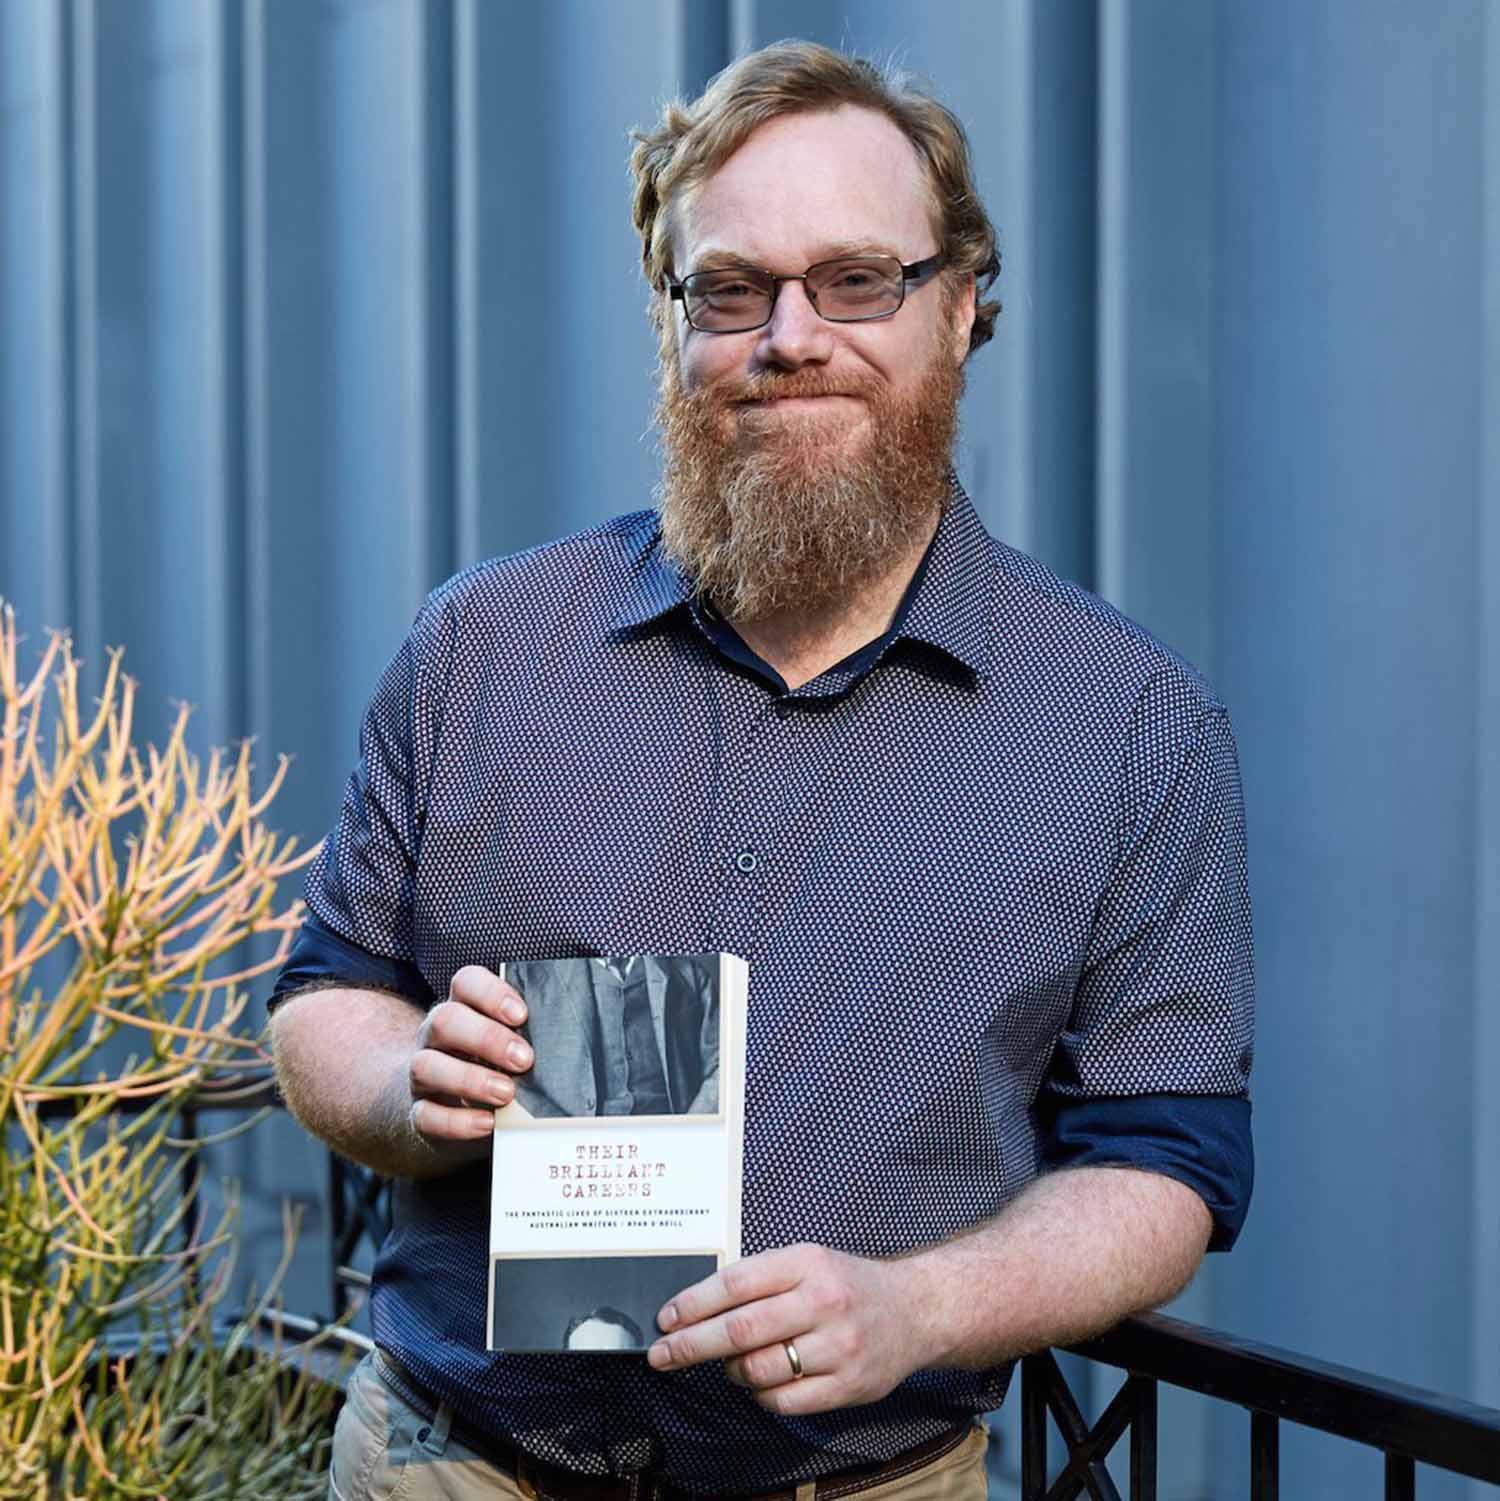 Dr Ryan O'Neill with his award-winning novel, Their Brilliant Careers^empty:{ds__assetid^as_asset:asset_name}